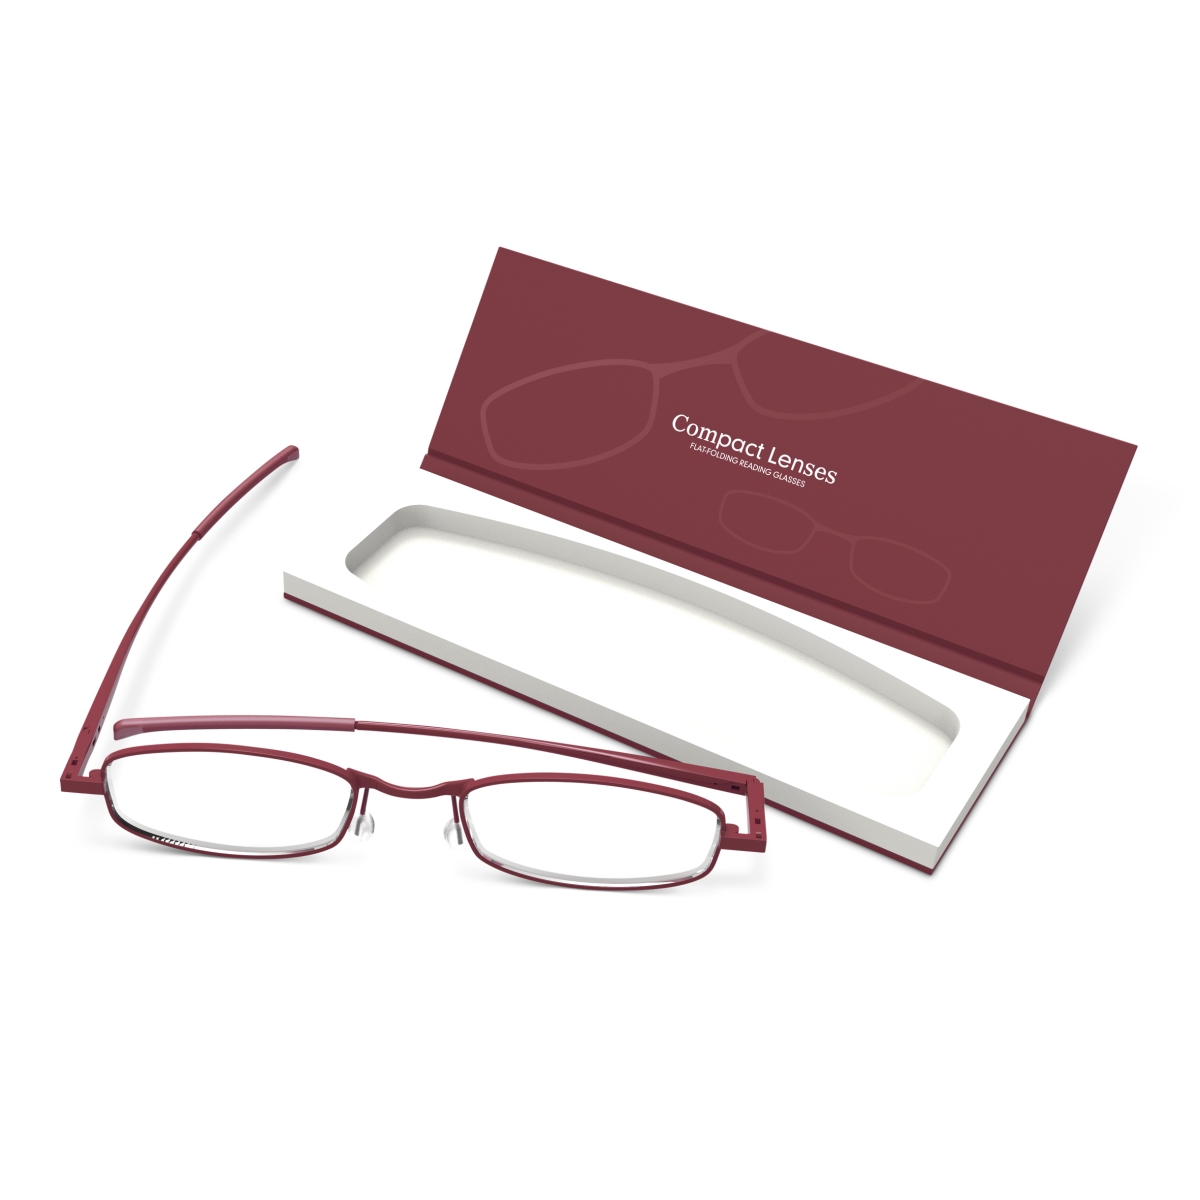 Picture of If USA 91734 Compact Lens Flat Folding Reading Glasses, Port - Plus 2.5